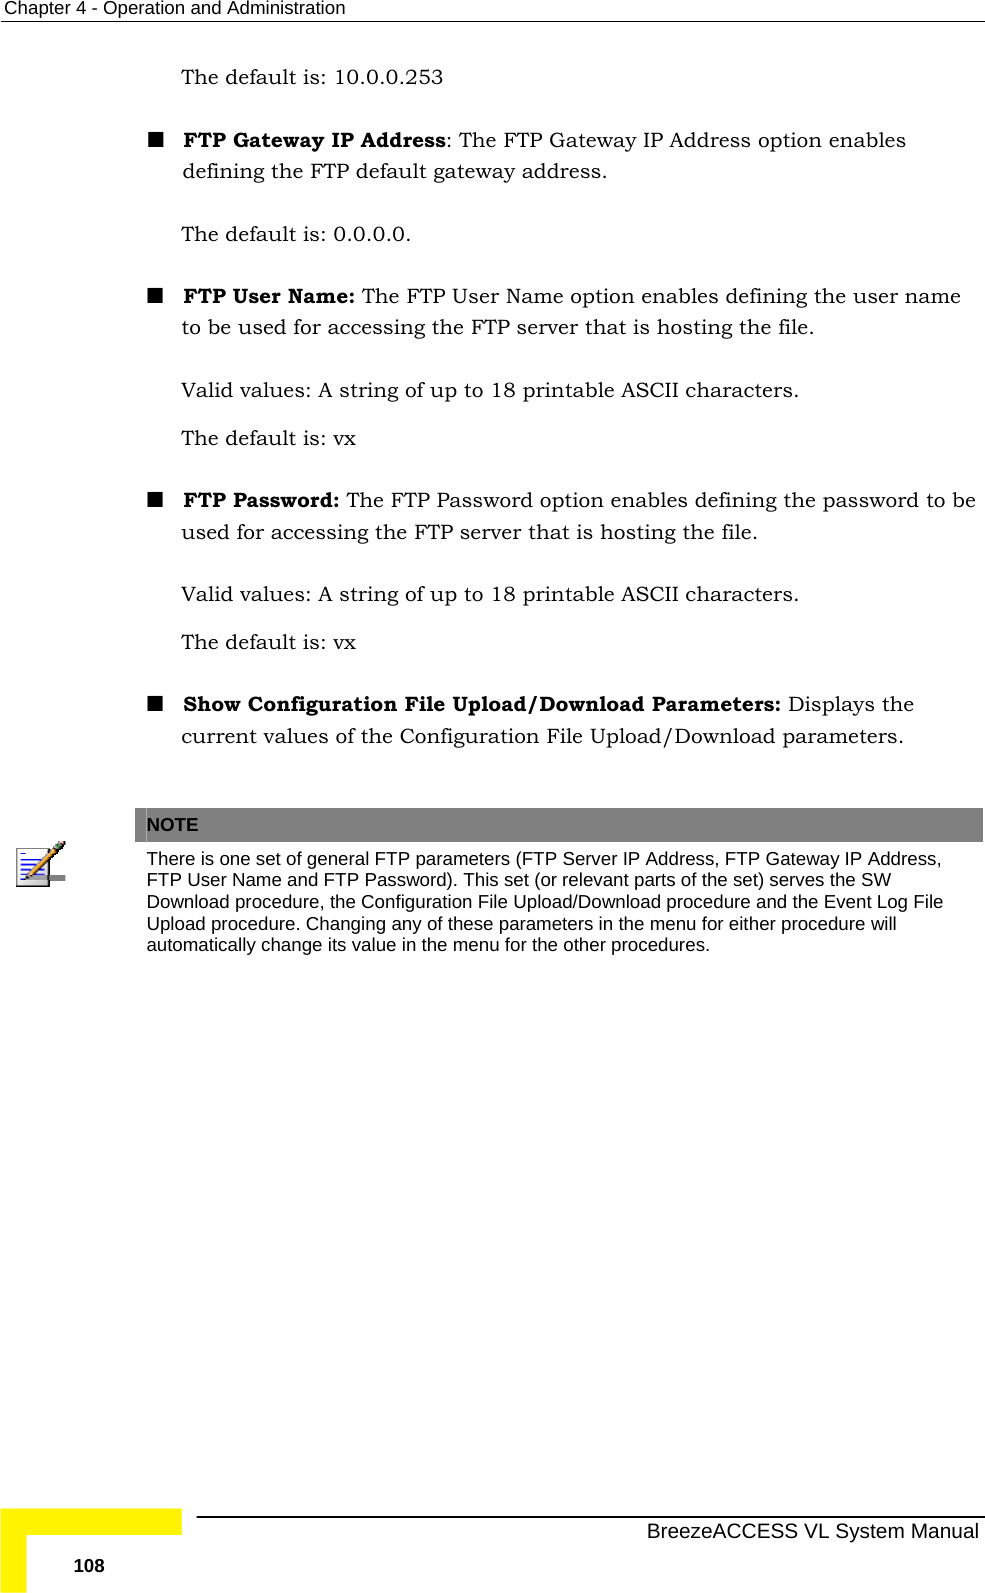 Chapter  4 - Operation and Administration   BreezeACCESS VL System Manual 108 The default is: 10.0.0.253   FTP Gateway IP Address: The FTP Gateway IP Address option enables defining the FTP default gateway address. The default is: 0.0.0.0.  FTP User Name: The FTP User Name option enables defining the user name to be used for accessing the FTP server that is hosting the file.  Valid values: A string of up to 18 printable ASCII characters. The default is: vx   FTP Password: The FTP Password option enables defining the password to be used for accessing the FTP server that is hosting the file.  Valid values: A string of up to 18 printable ASCII characters. The default is: vx    Show Configuration File Upload/Download Parameters: Displays the current values of the Configuration File Upload/Download parameters.   NOTE  There is one set of general FTP parameters (FTP Server IP Address, FTP Gateway IP Address, FTP User Name and FTP Password). This set (or relevant parts of the set) serves the SW Download procedure, the Configuration File Upload/Download procedure and the Event Log File Upload procedure. Changing any of these parameters in the menu for either procedure will automatically change its value in the menu for the other procedures. 